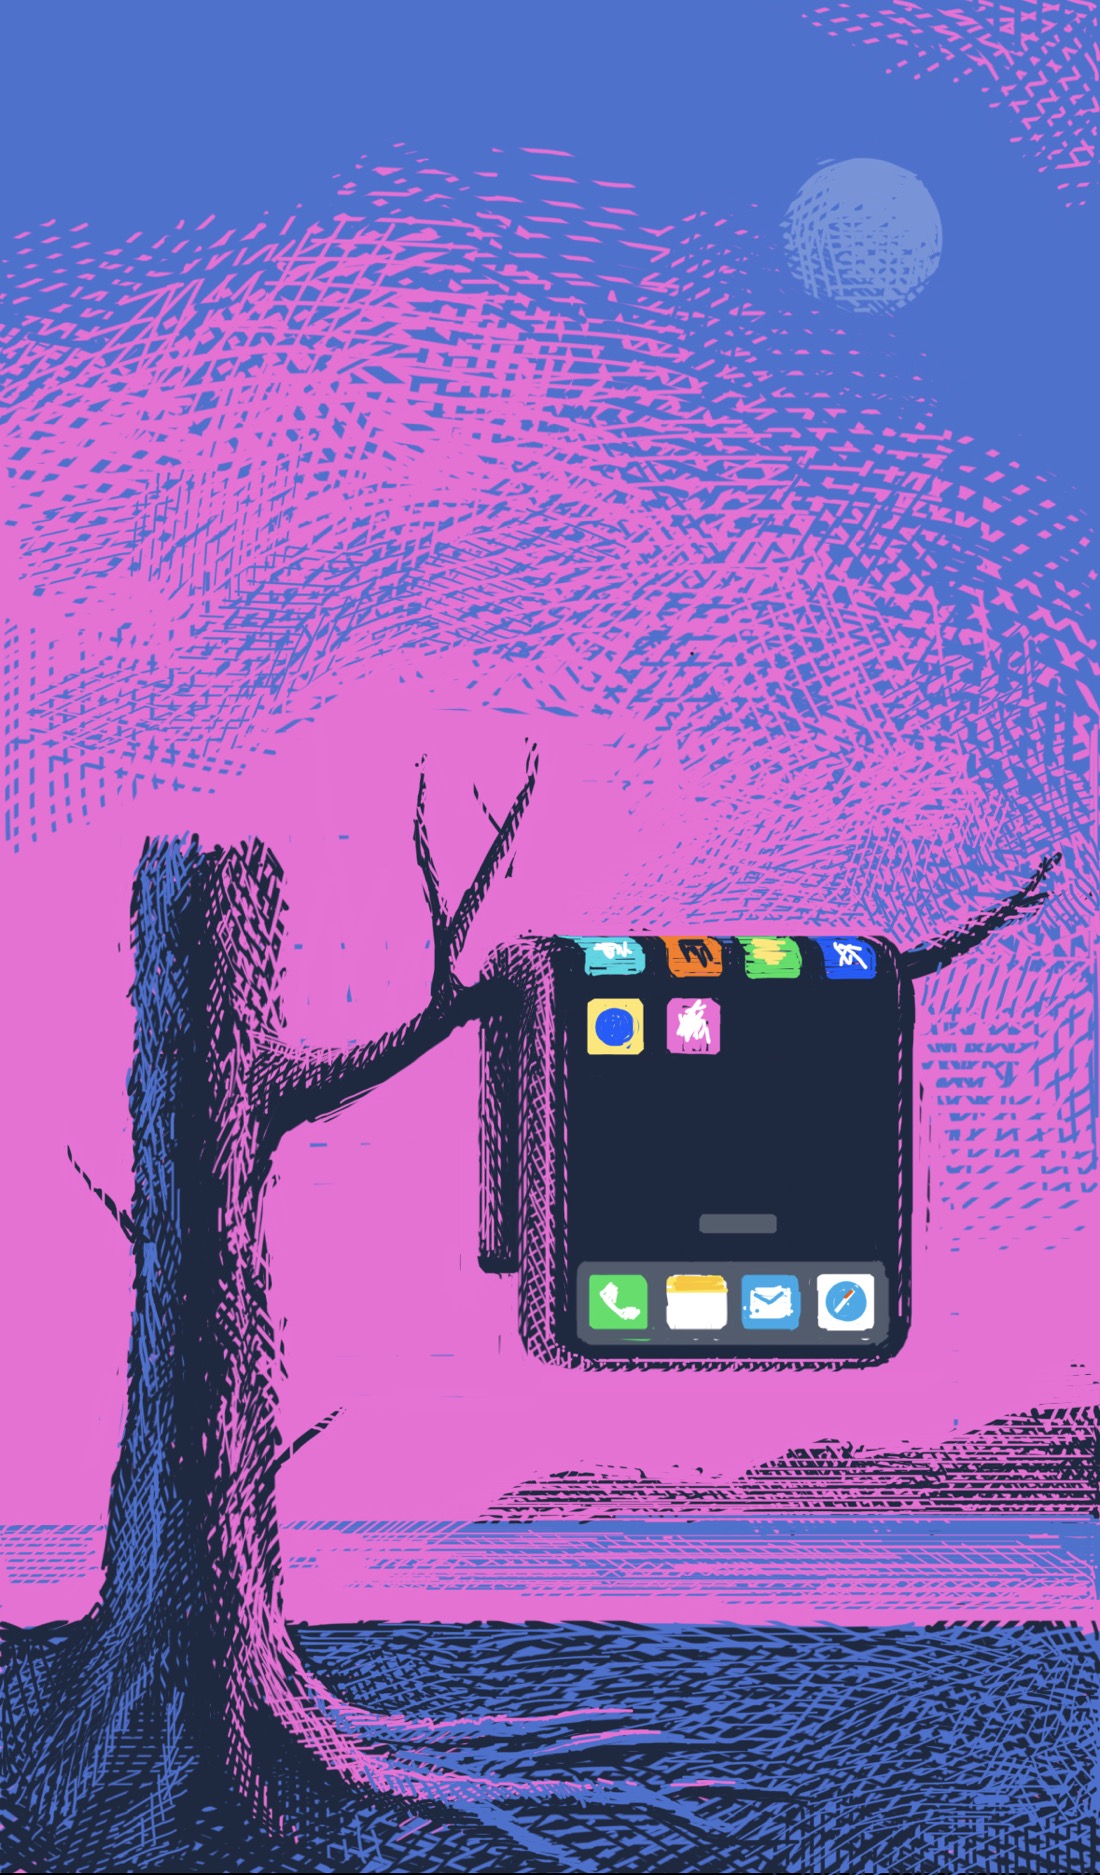 A stump of a tree stands near a flat, grassless riverbank. The stump has a branch that sticks far out. Draped over it is an iPhone, the screen displaying colored icons. The iPhone is draped like a towel, bent over the branch as though it's made of rubber. The sky looks like either dawn or dusk: pink clouds, and the ghost of a moon high up in the sky.